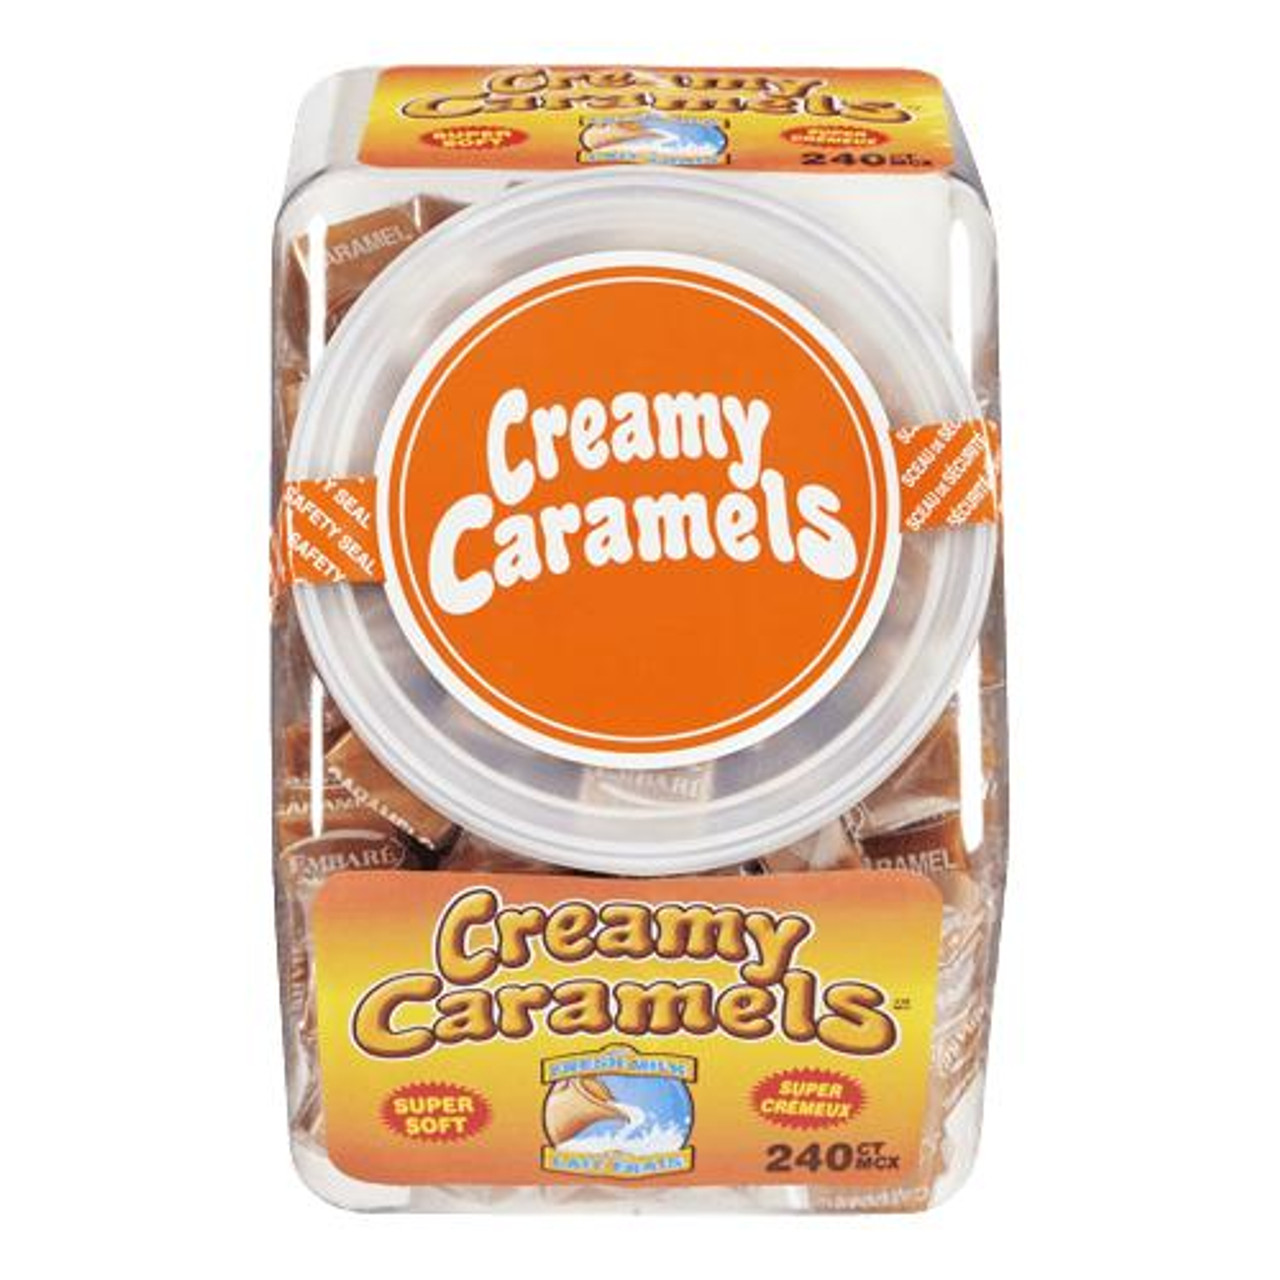  REGAL Creamy Caramels 1.6kg/3.52lbs - Irresistibly Rich and Buttery 